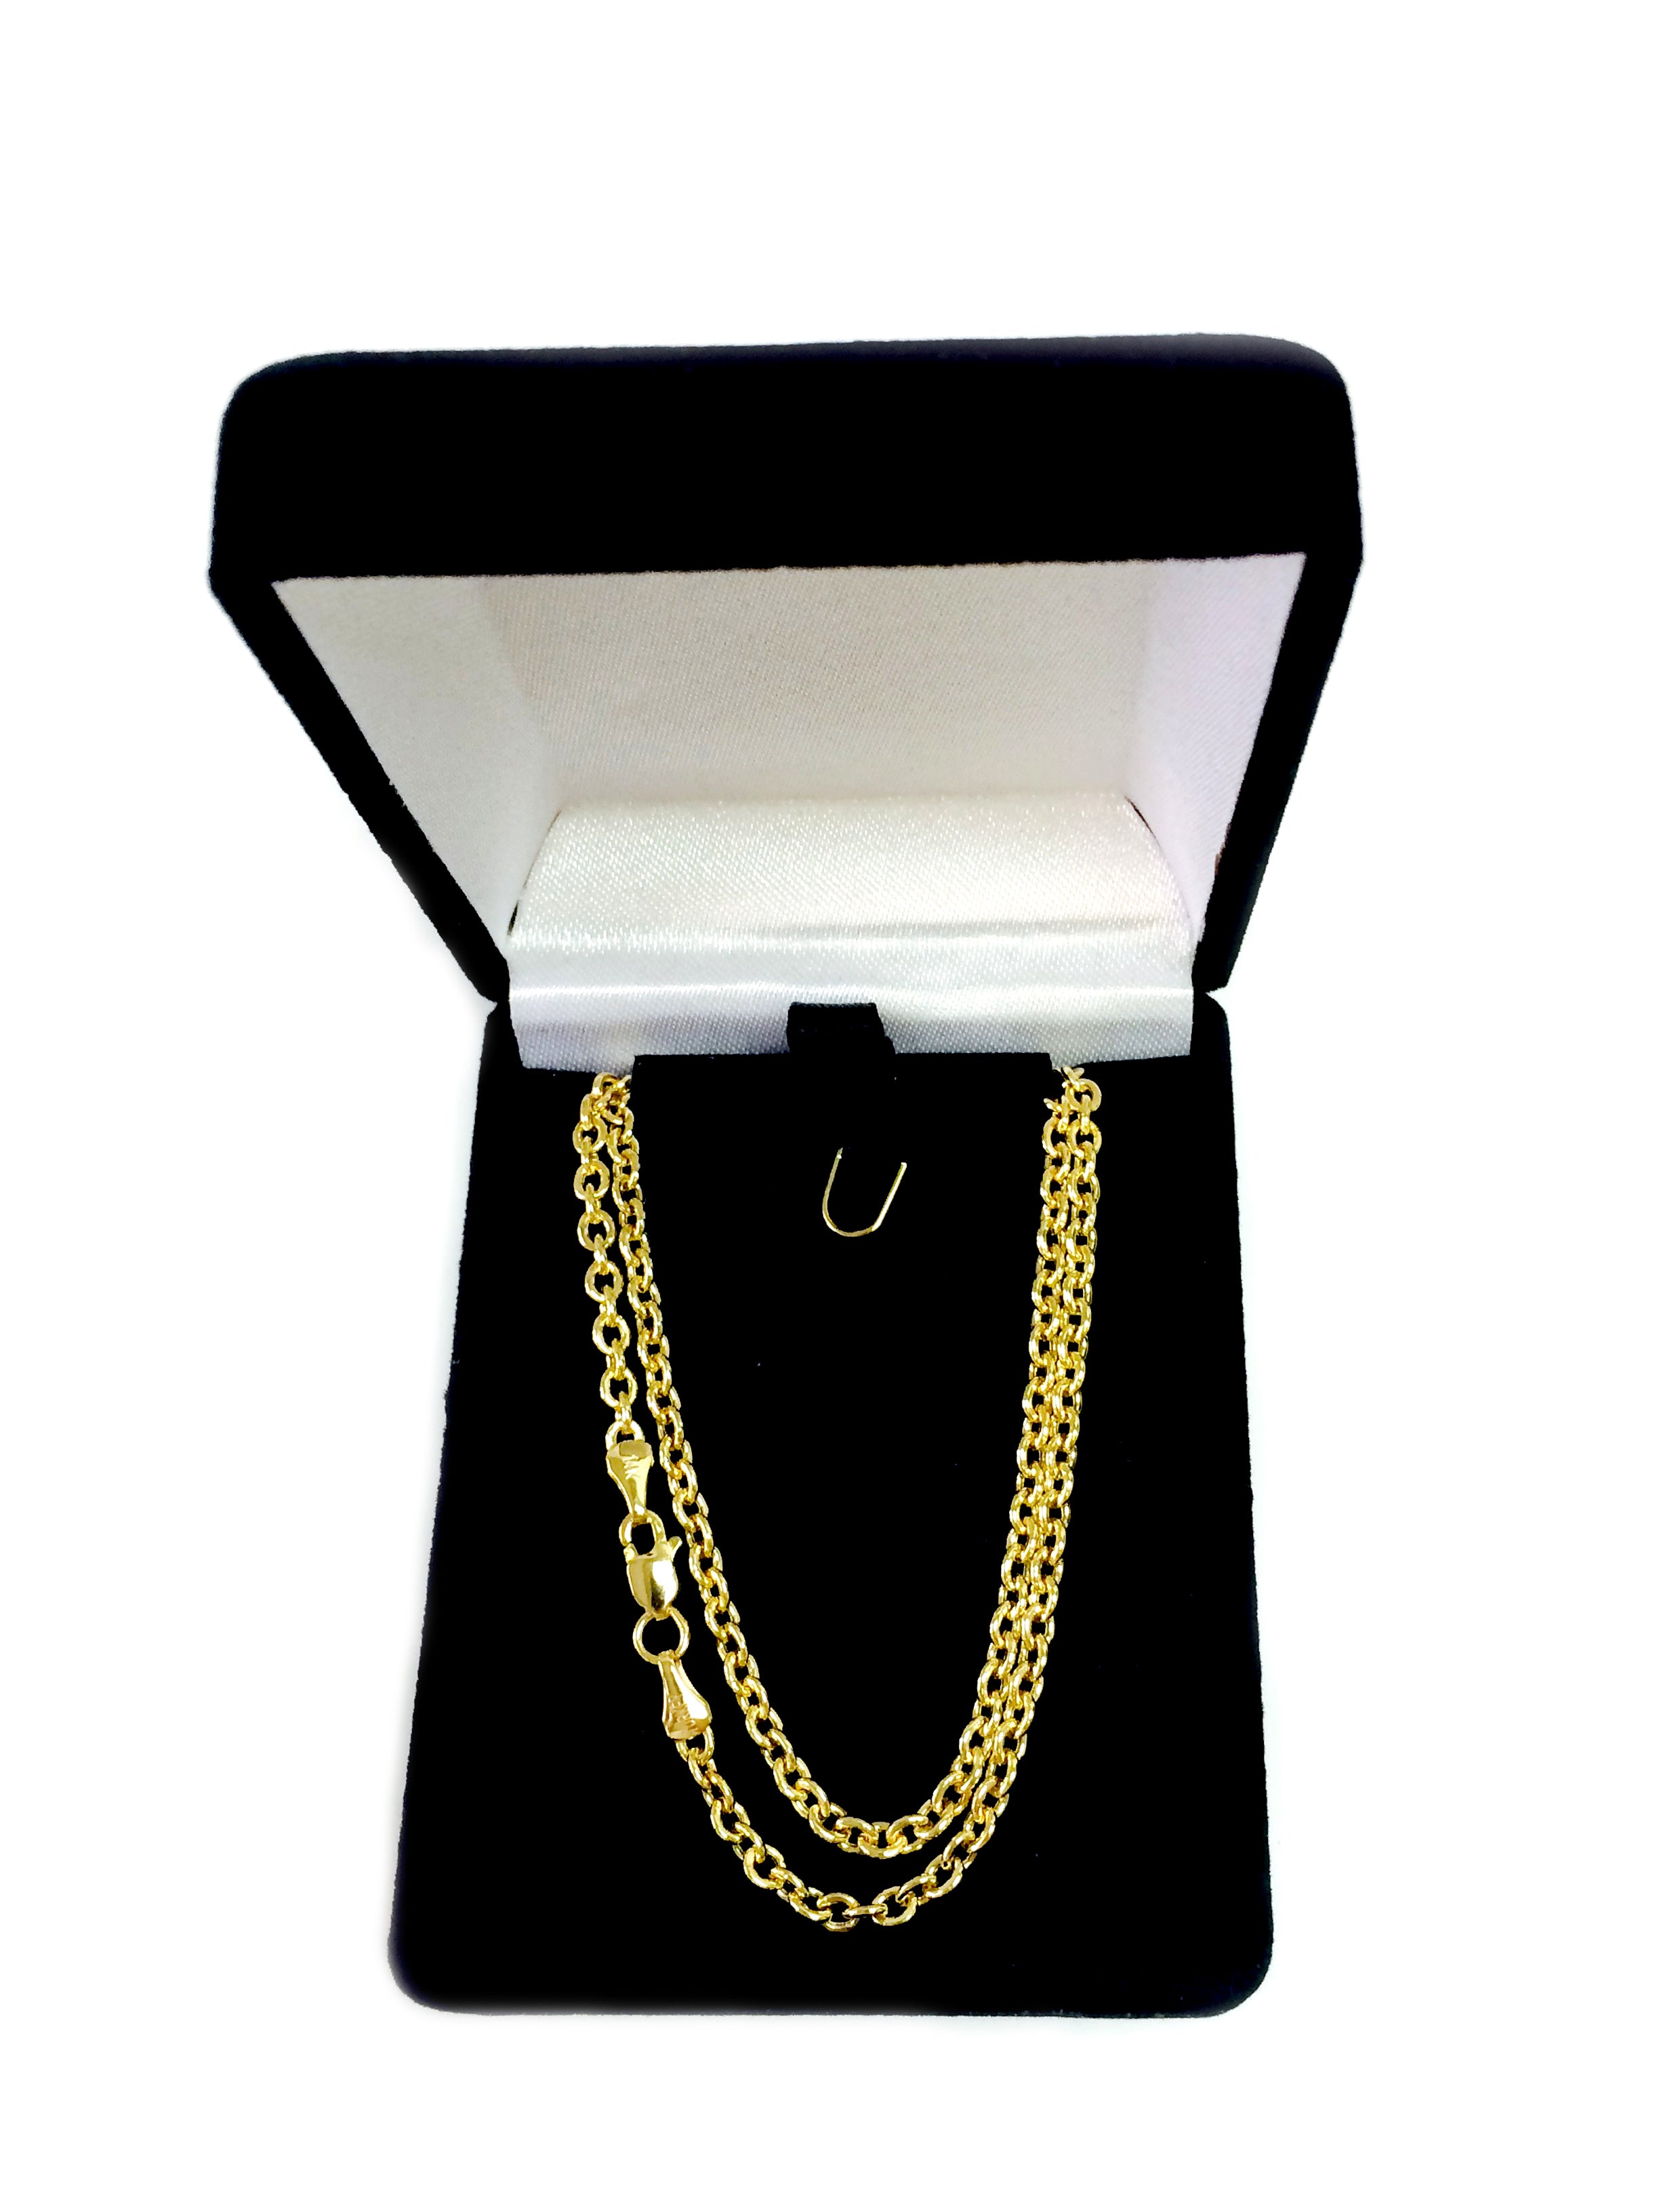 14k Yellow Gold Forsantina Chain Necklace, 3.1mm fine designer jewelry for men and women